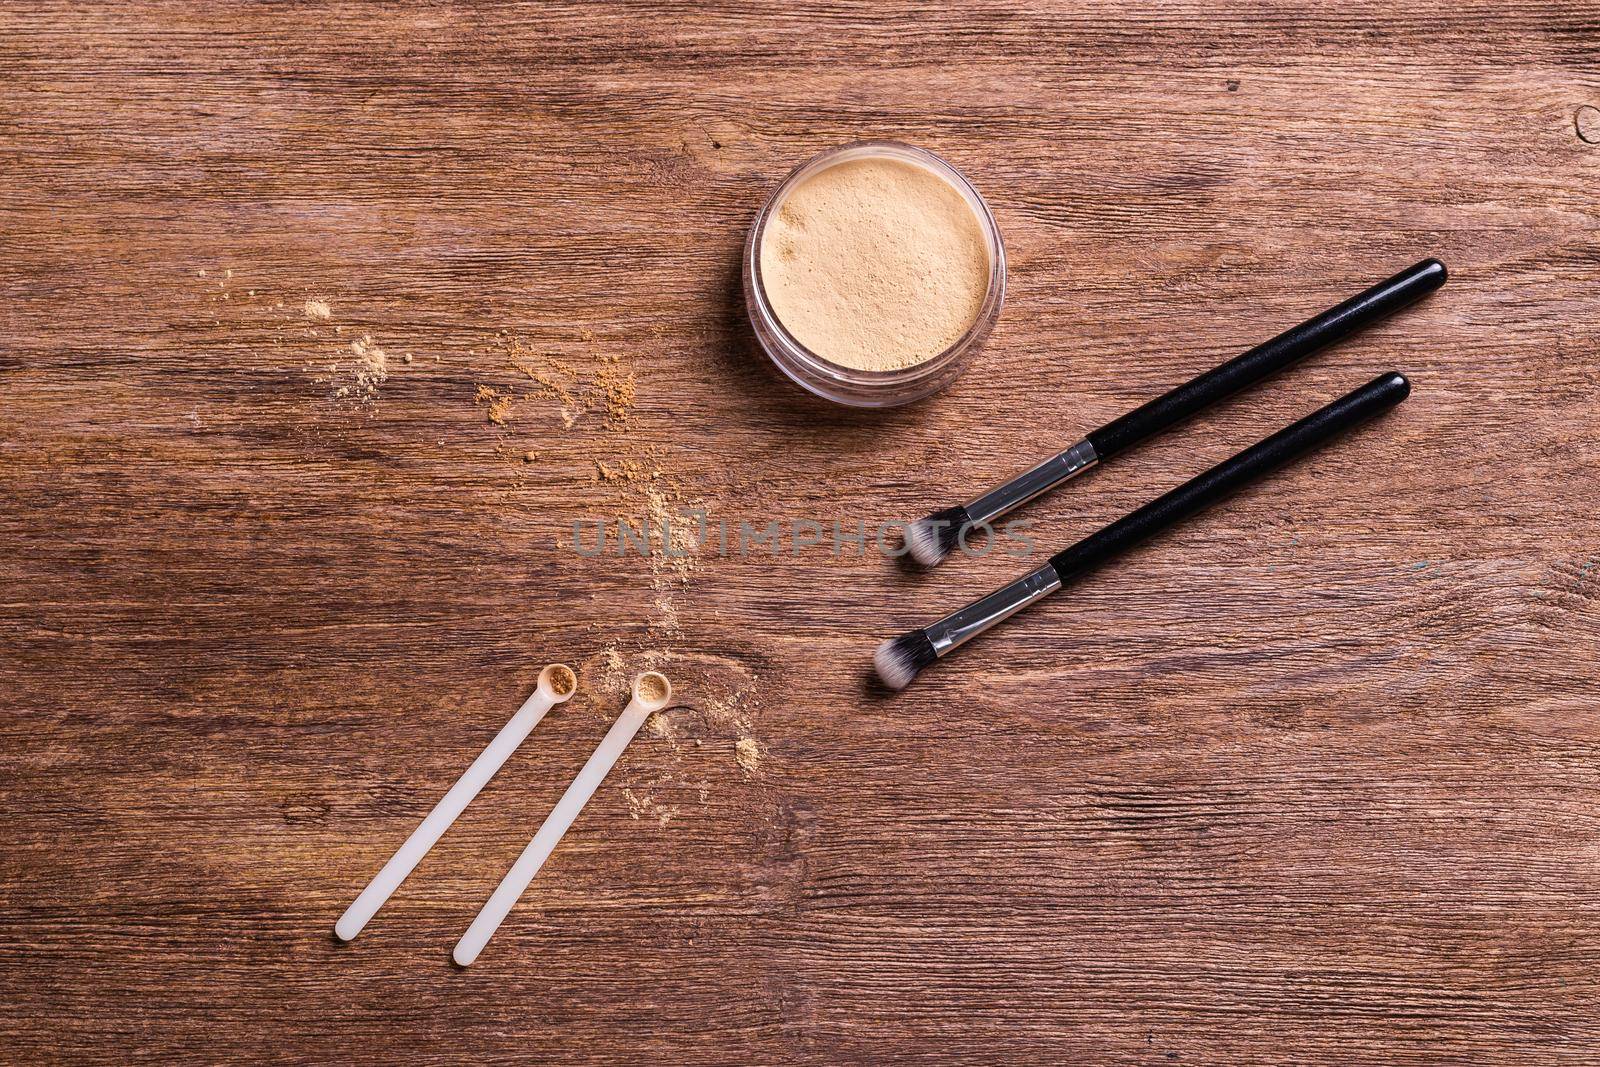 Mineral powder foundation with brush on a wooden background.